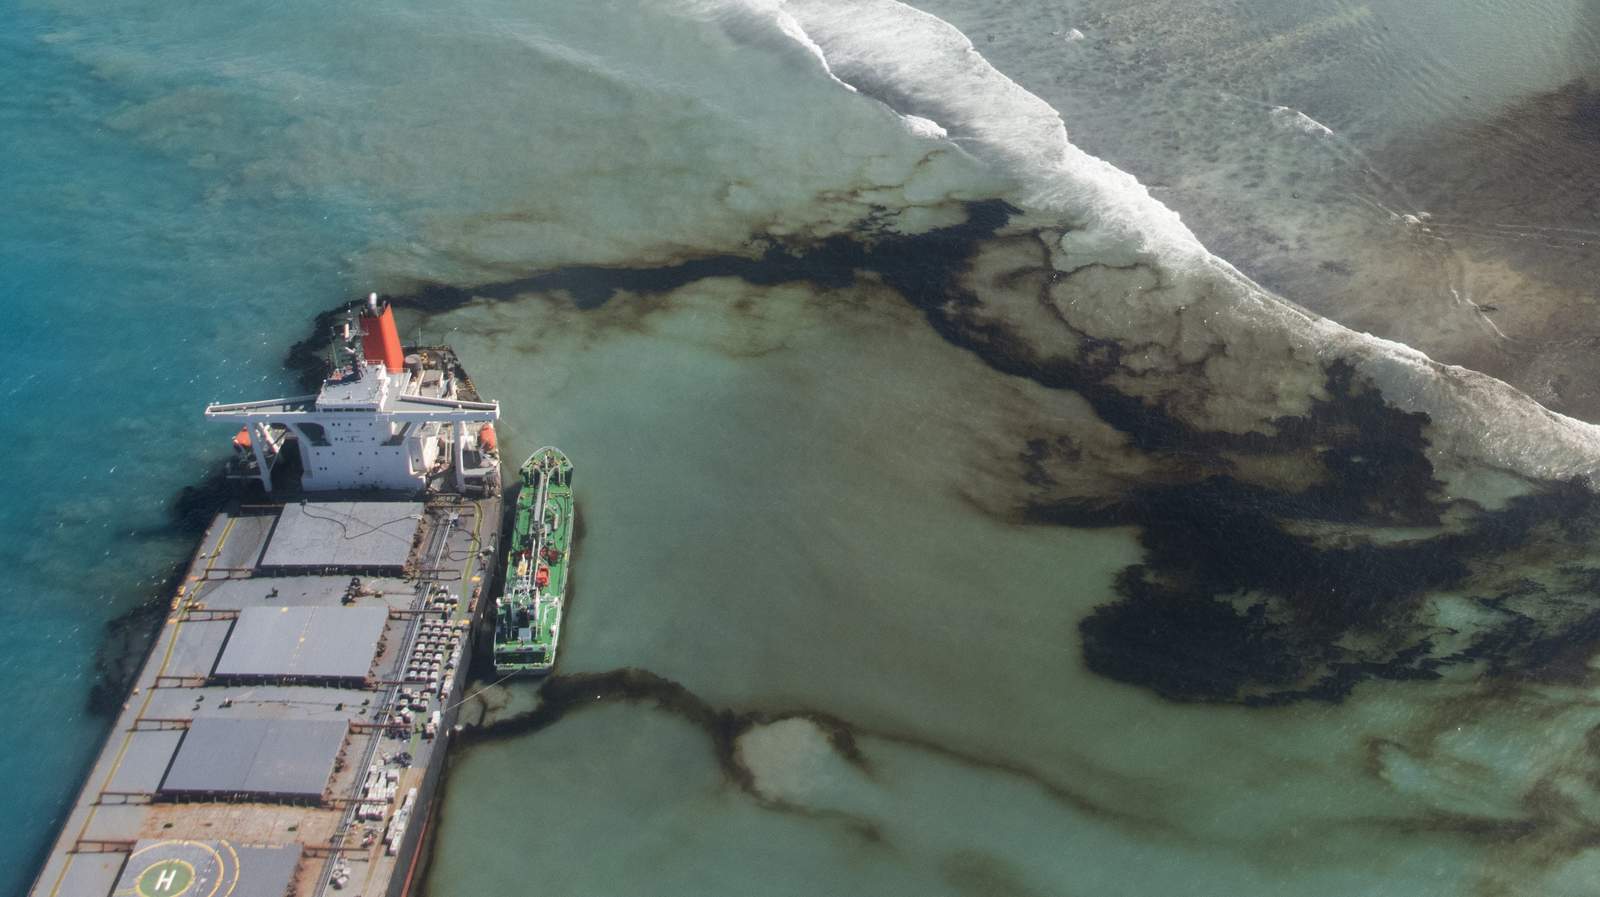 Mauritius seeks compensation as oil spill cleanup continues